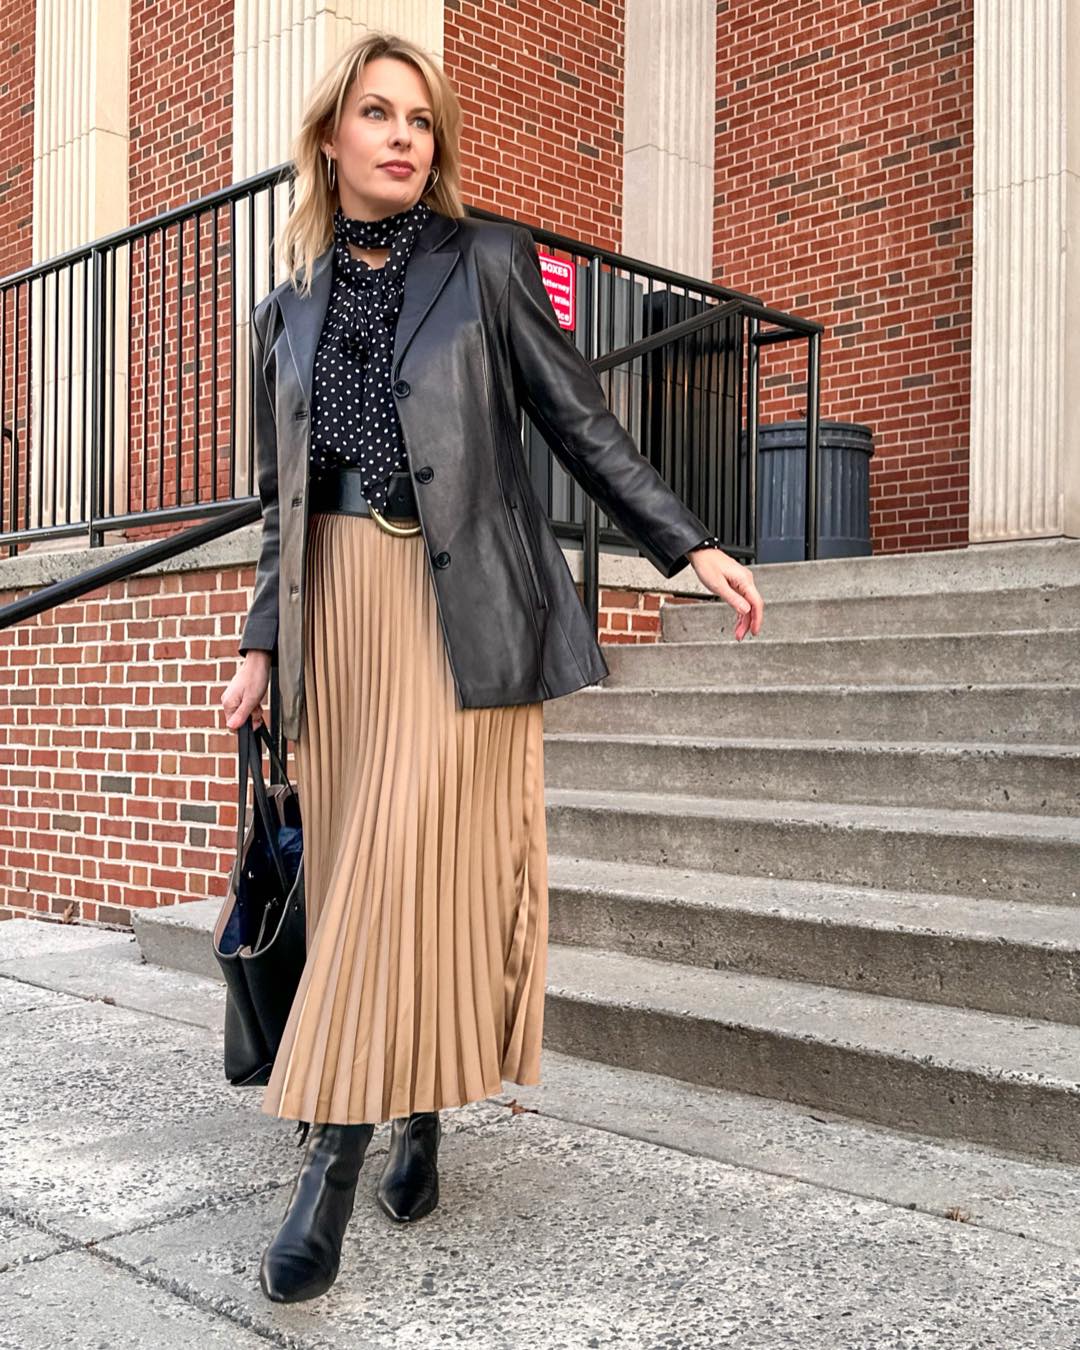 Stacey Jones (@instylewithstacey) is a freelance personal stylist and fashion blogger based in Washington DC.